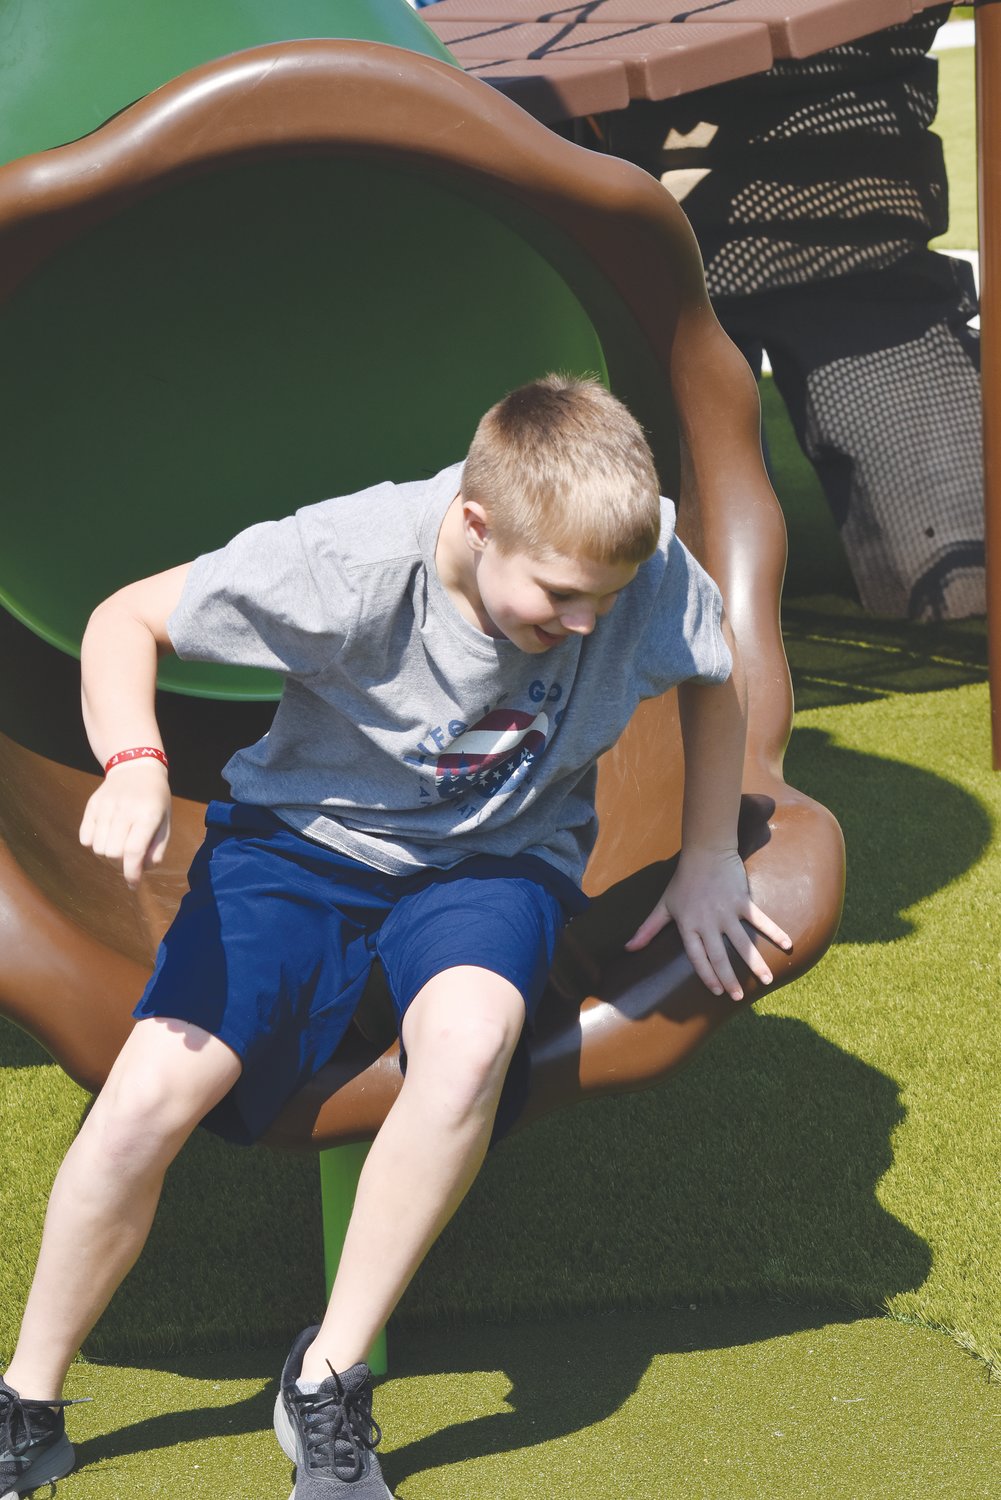 Gage Andress scampered out of one of the covered slides at the grand opening of Cross Timbers Park in April 2021.